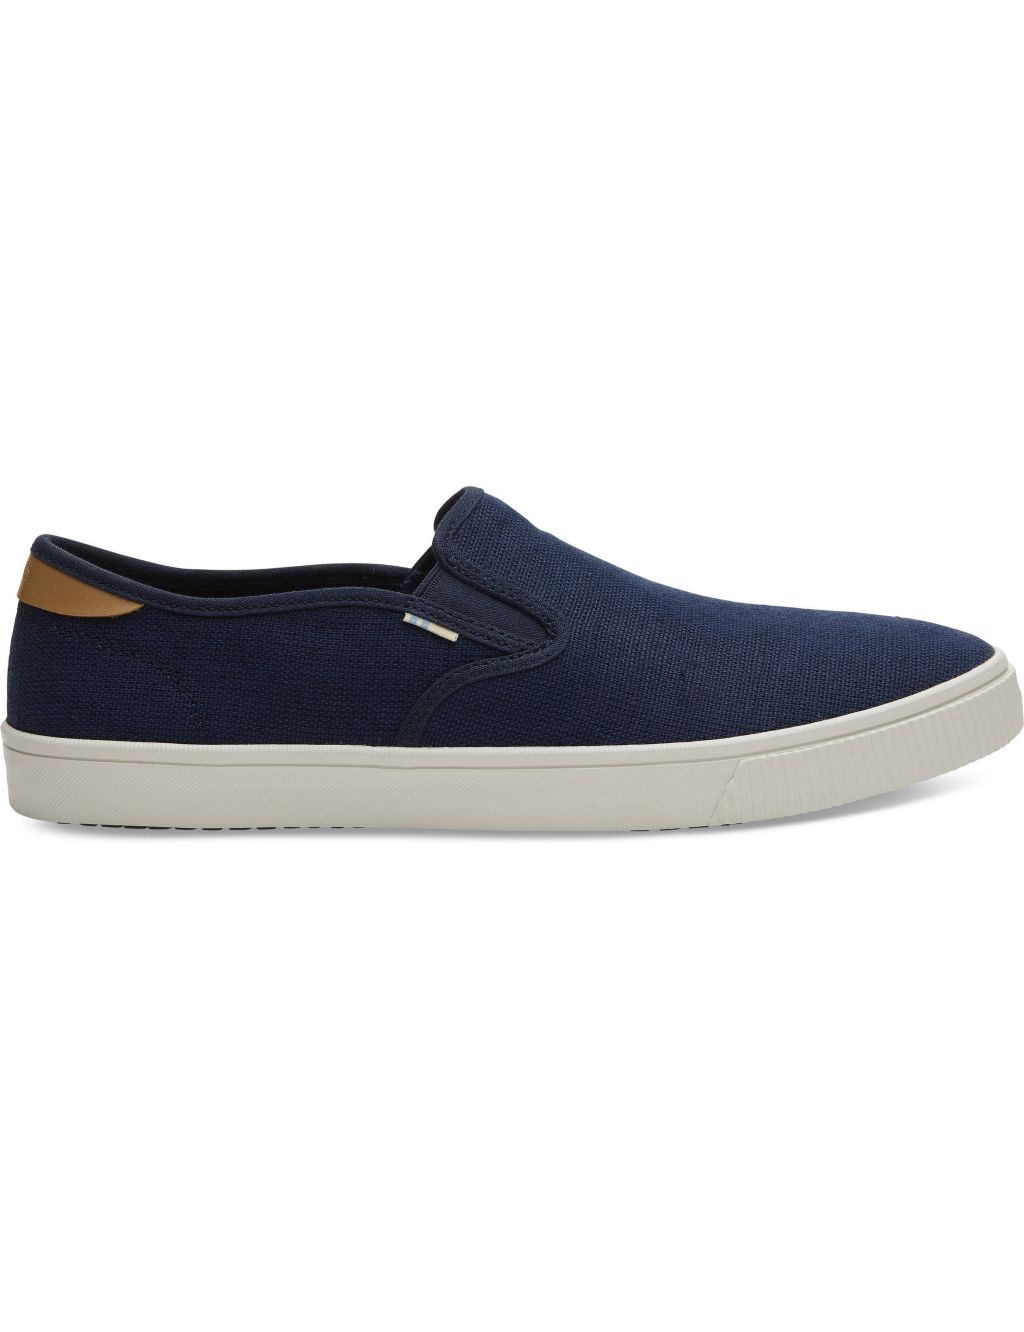 Canvas Slip-On Trainers image 1